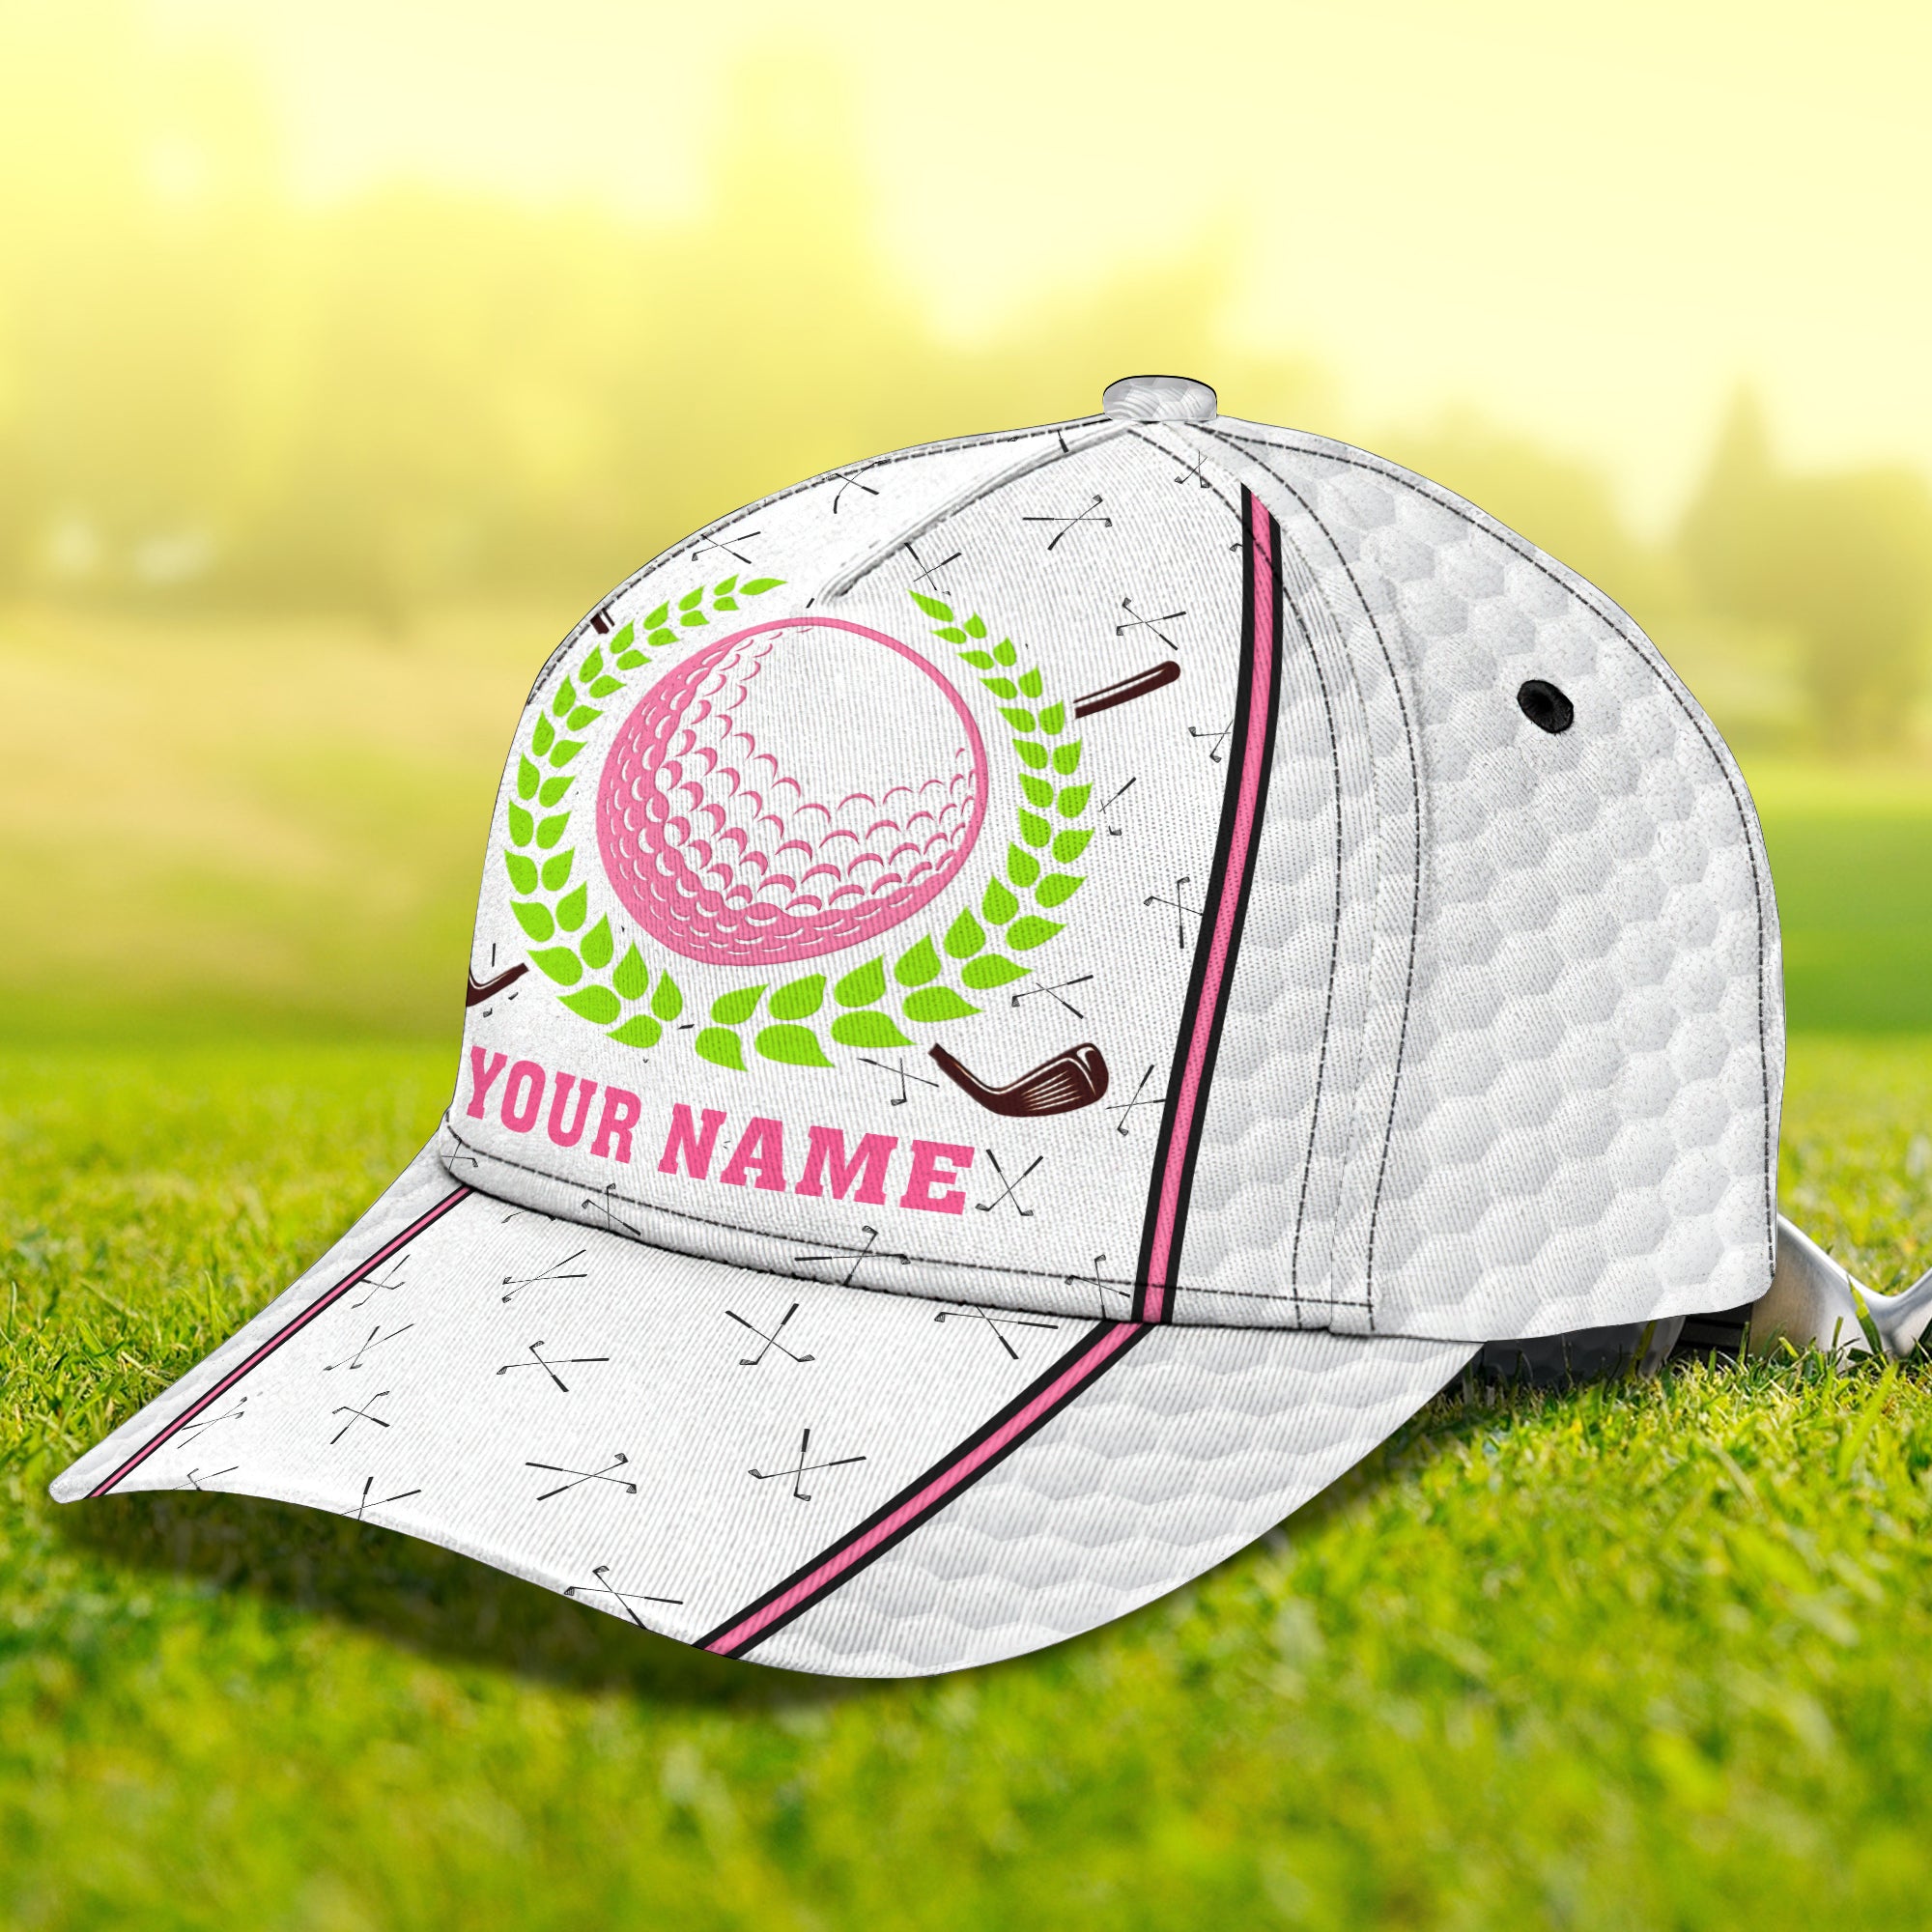 GOLF CAP2 - Personalized Name Cap - BY97